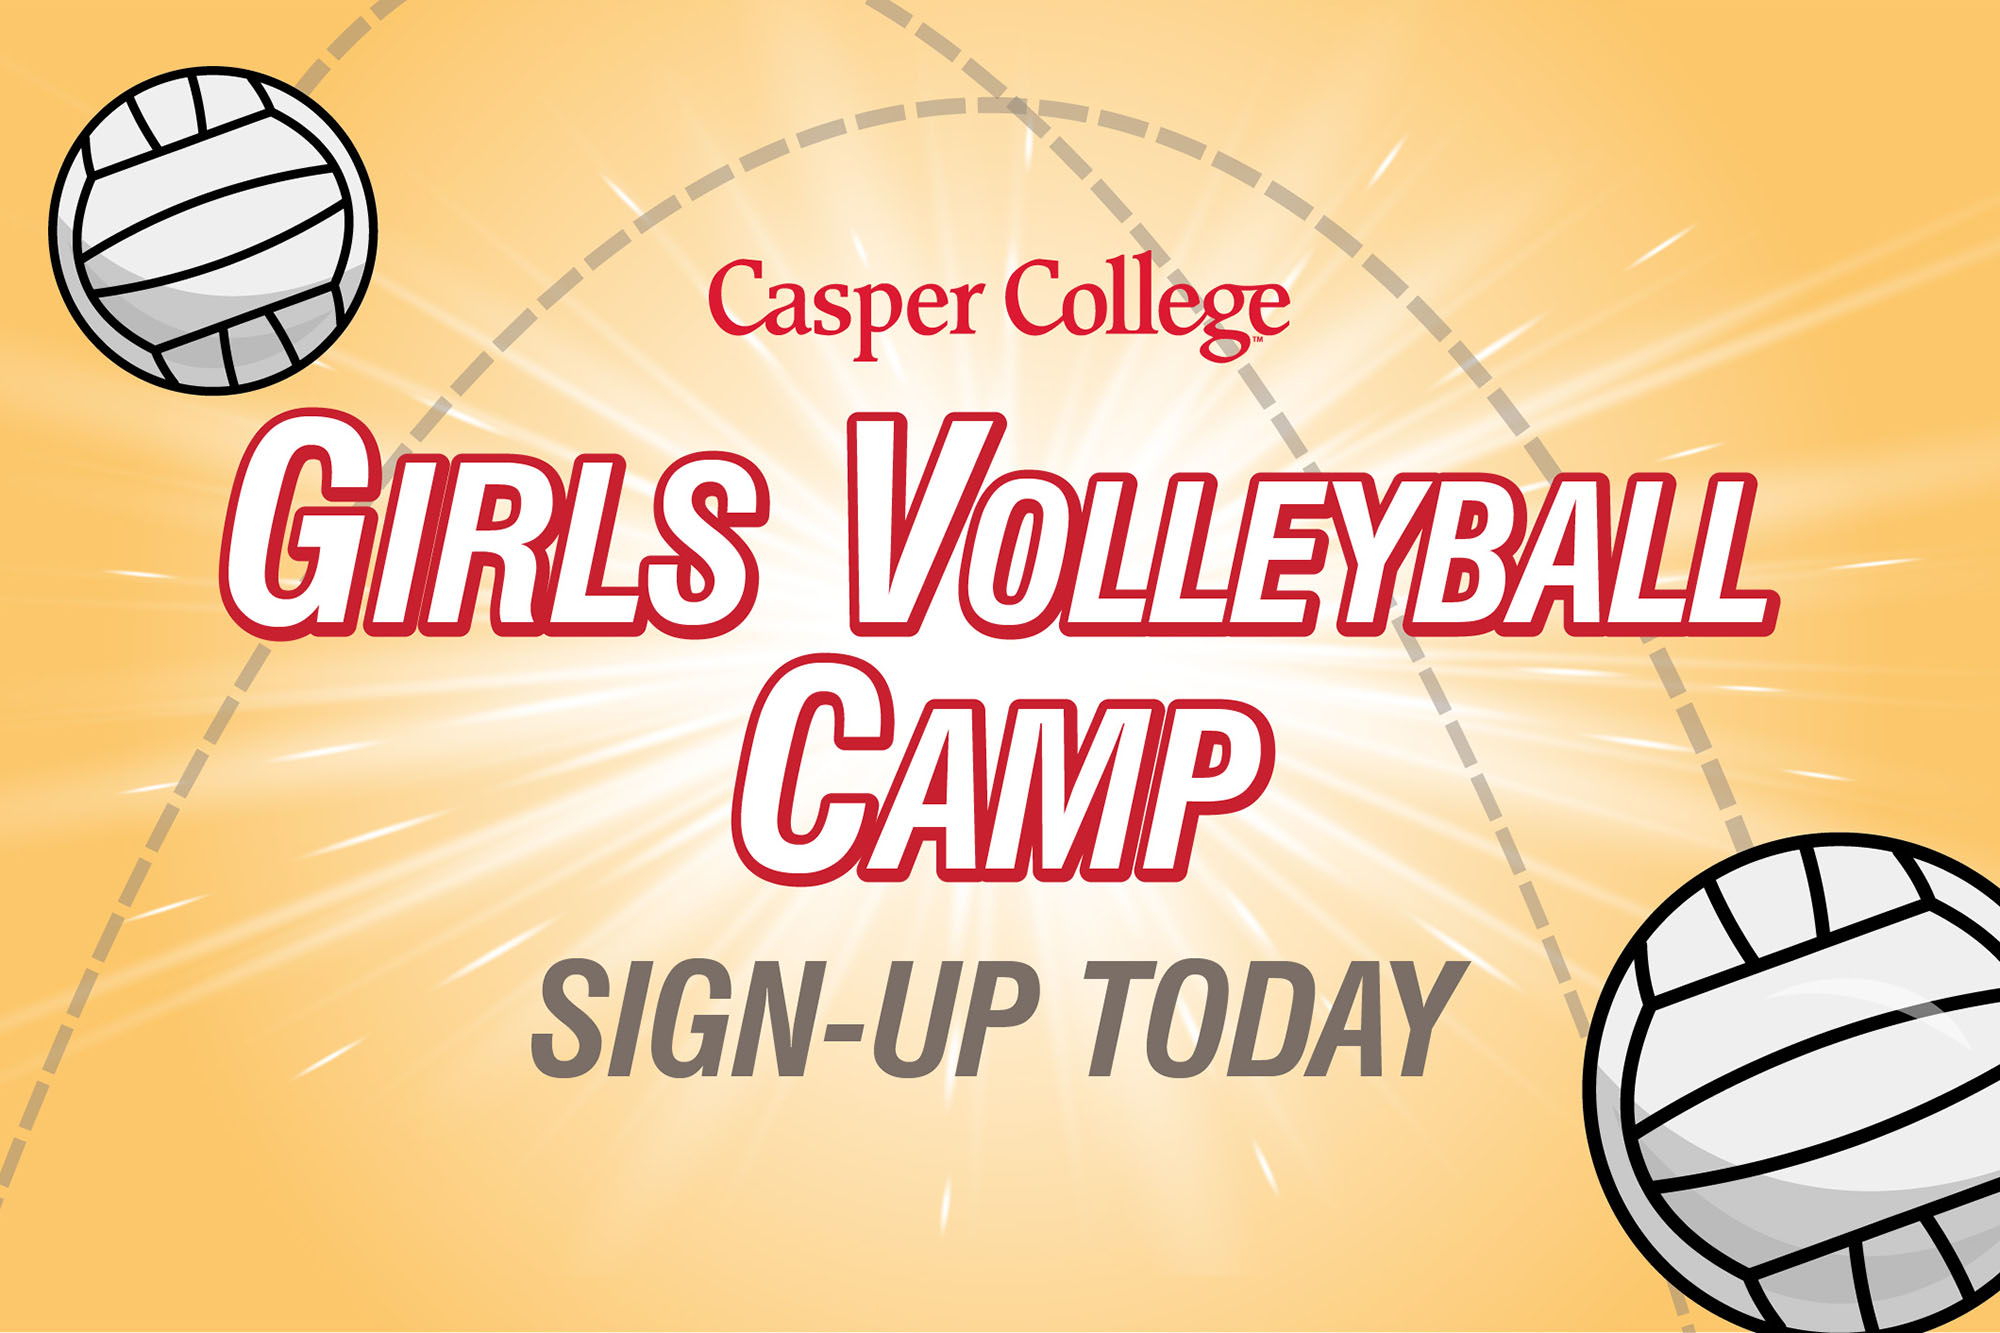 Image for Girls' Volleyball Camp press release.